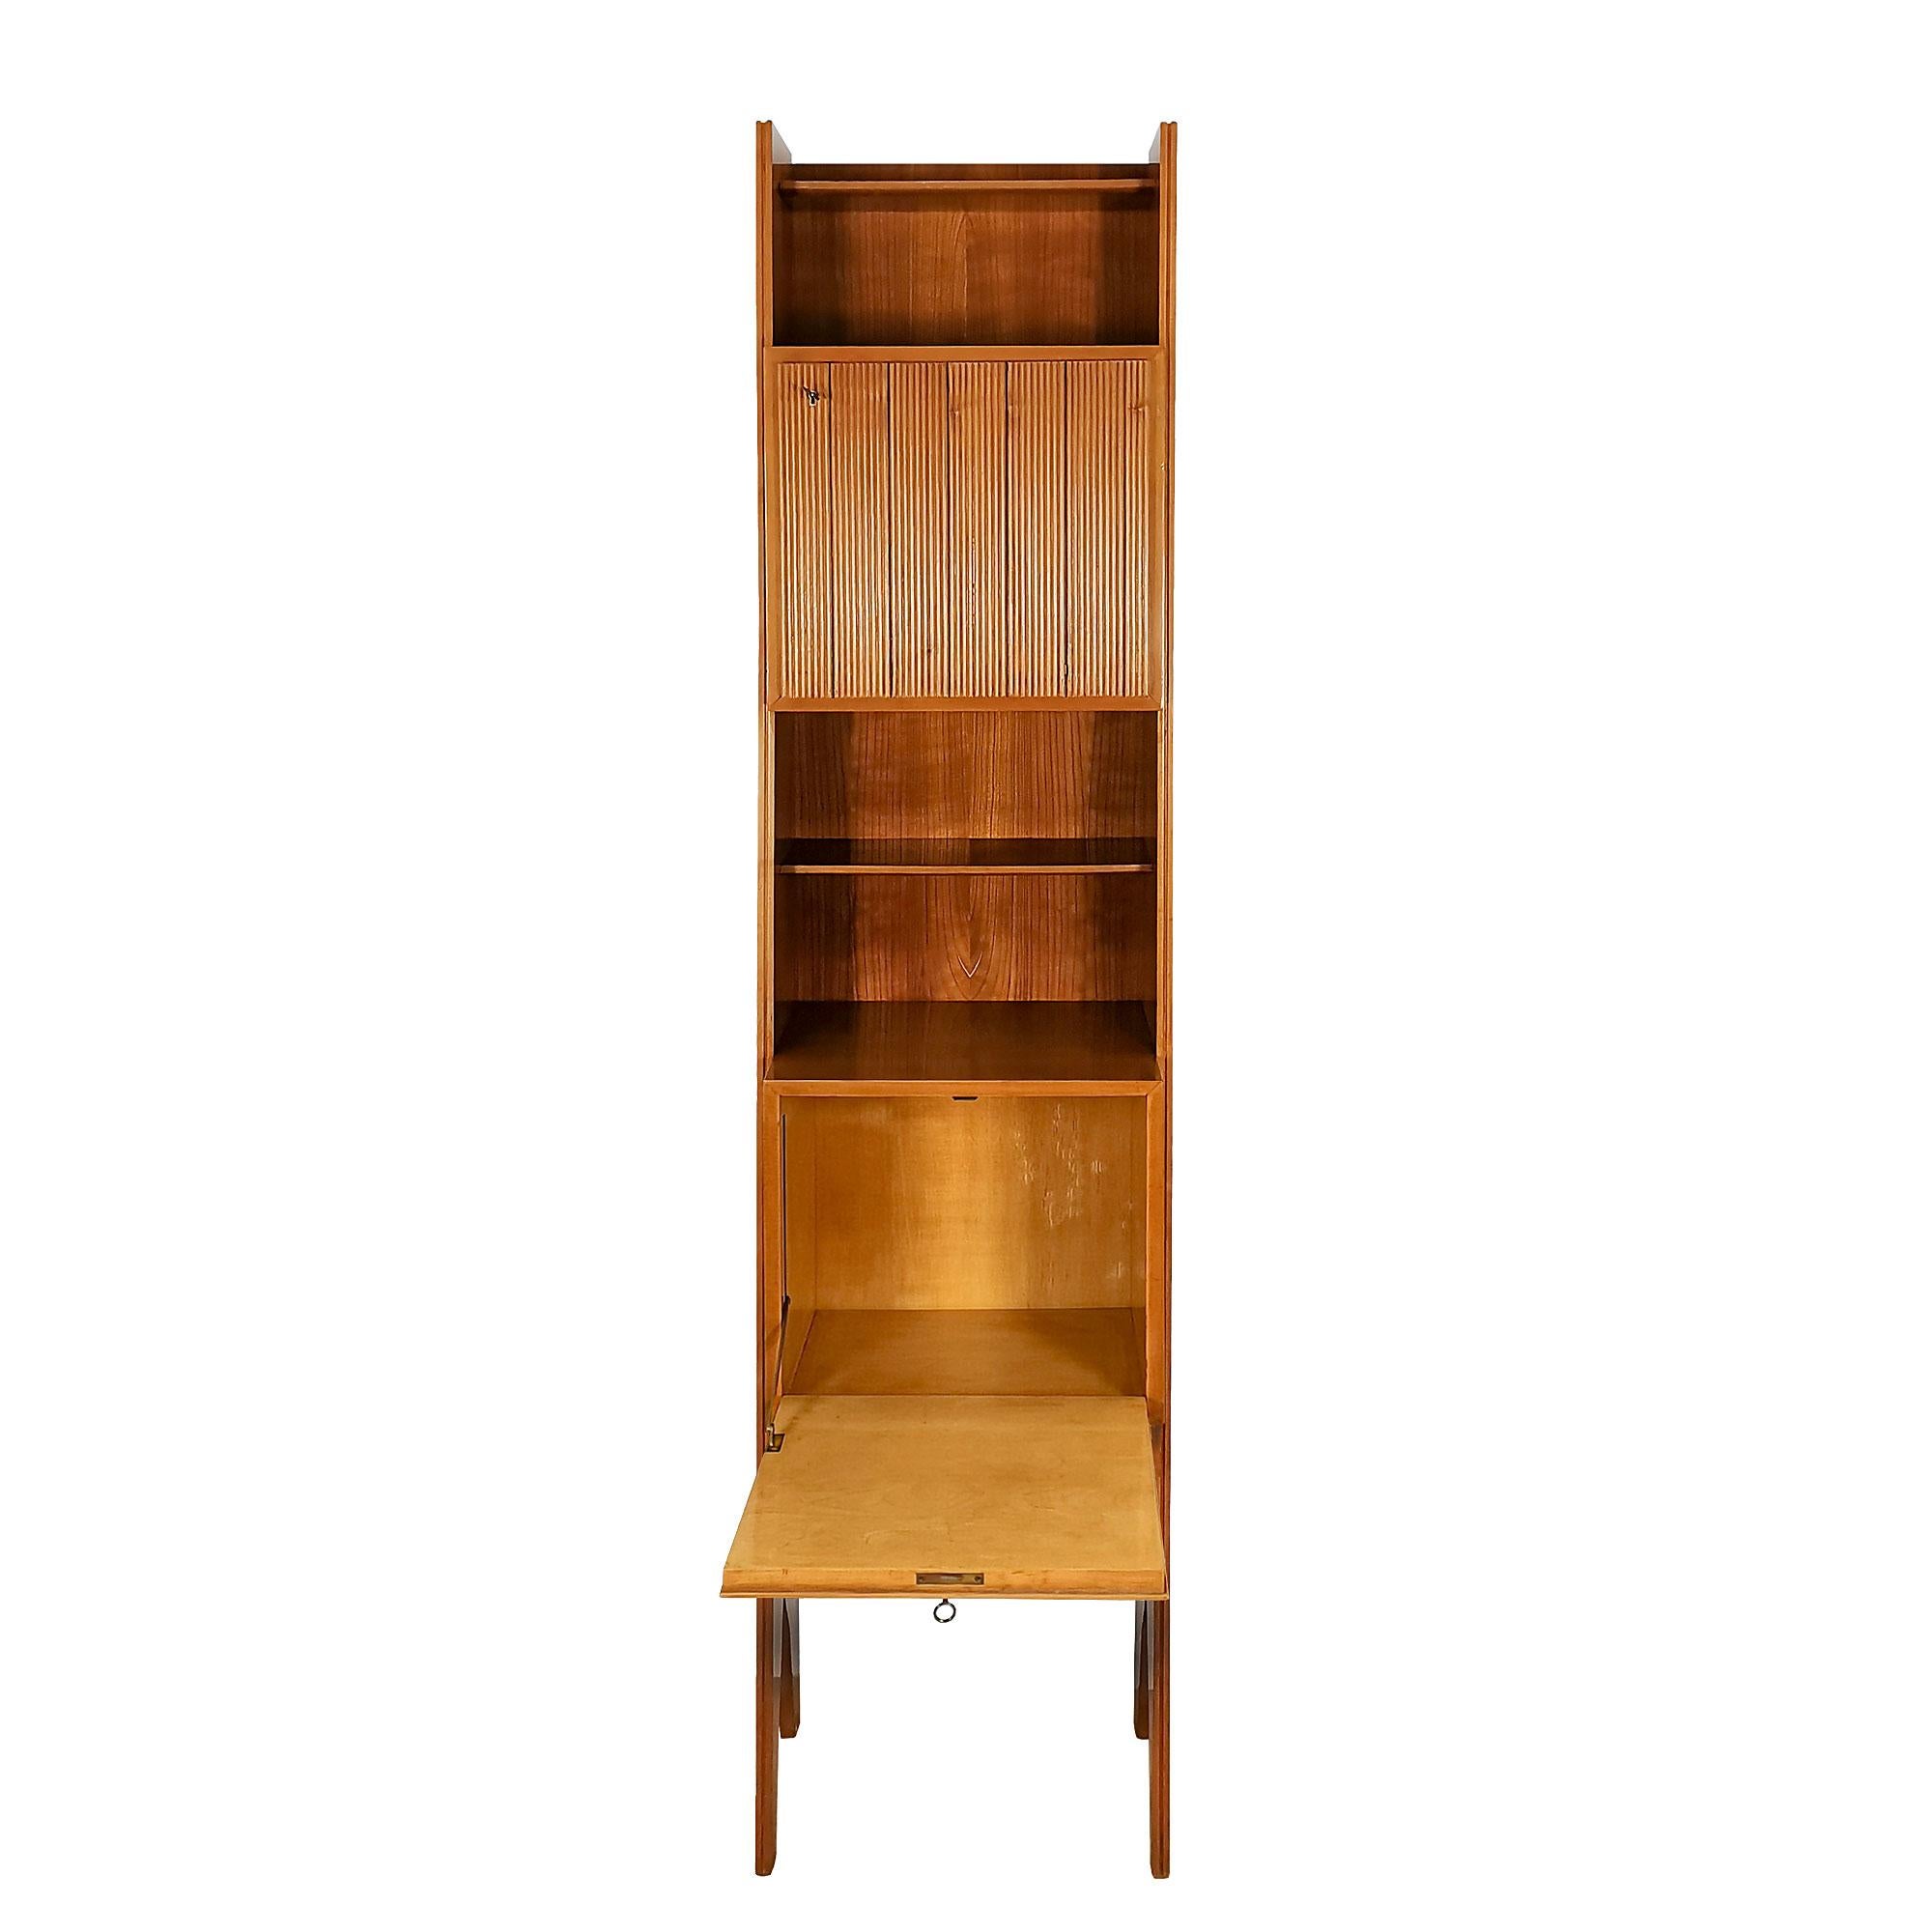 Mid-20th Century Mid-Century Modern Cherry Wood Bookcase With Shelves and Two Doors - Italy For Sale